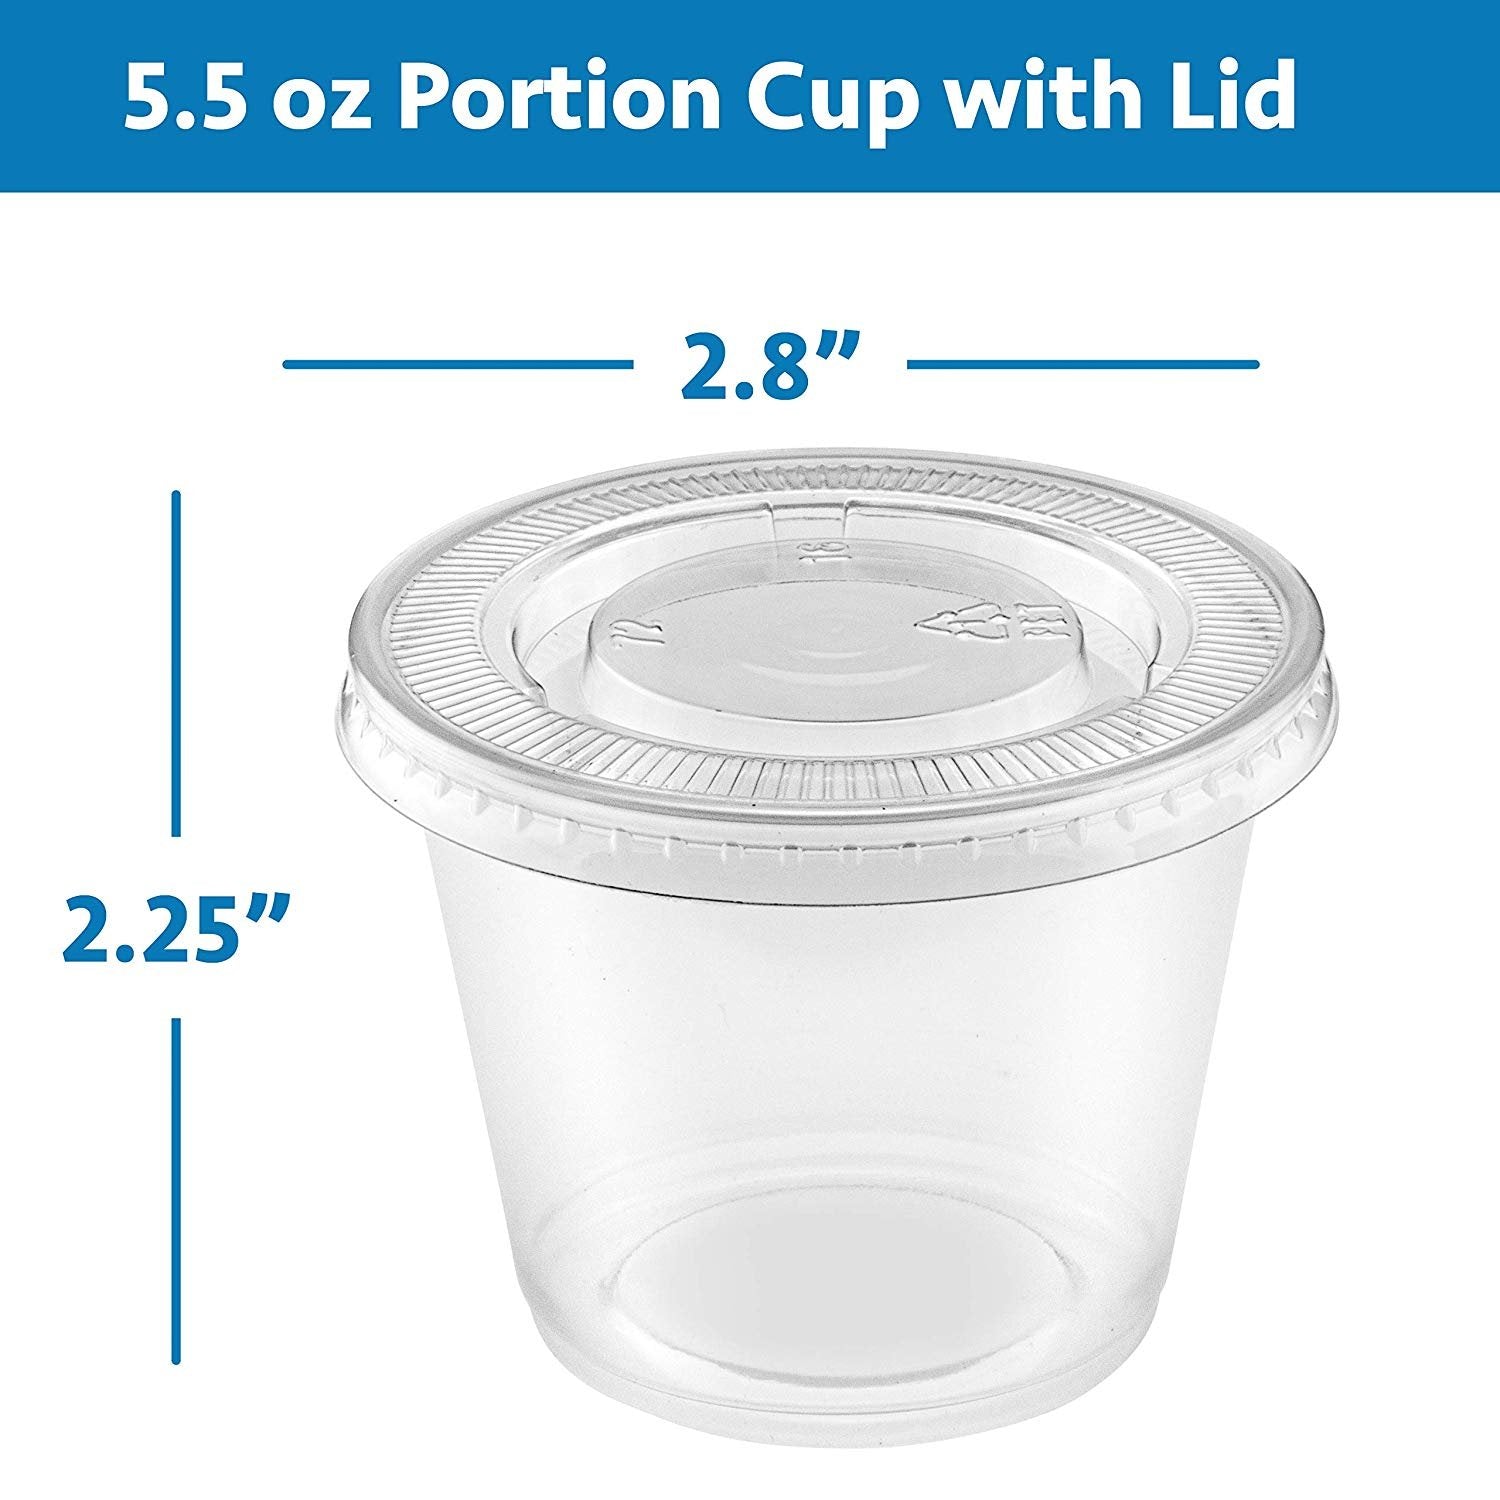 100-Pack of 5.5 Ounce Clear Plastic Jello Shot Cup Containers with Snap on Leak-Proof Lids –Jello Shooter Shot Cups -FDA-Approved -Compact Food Storage for Portion Control, 5 oz,Sauces, Liquid, Dips - NY-HI